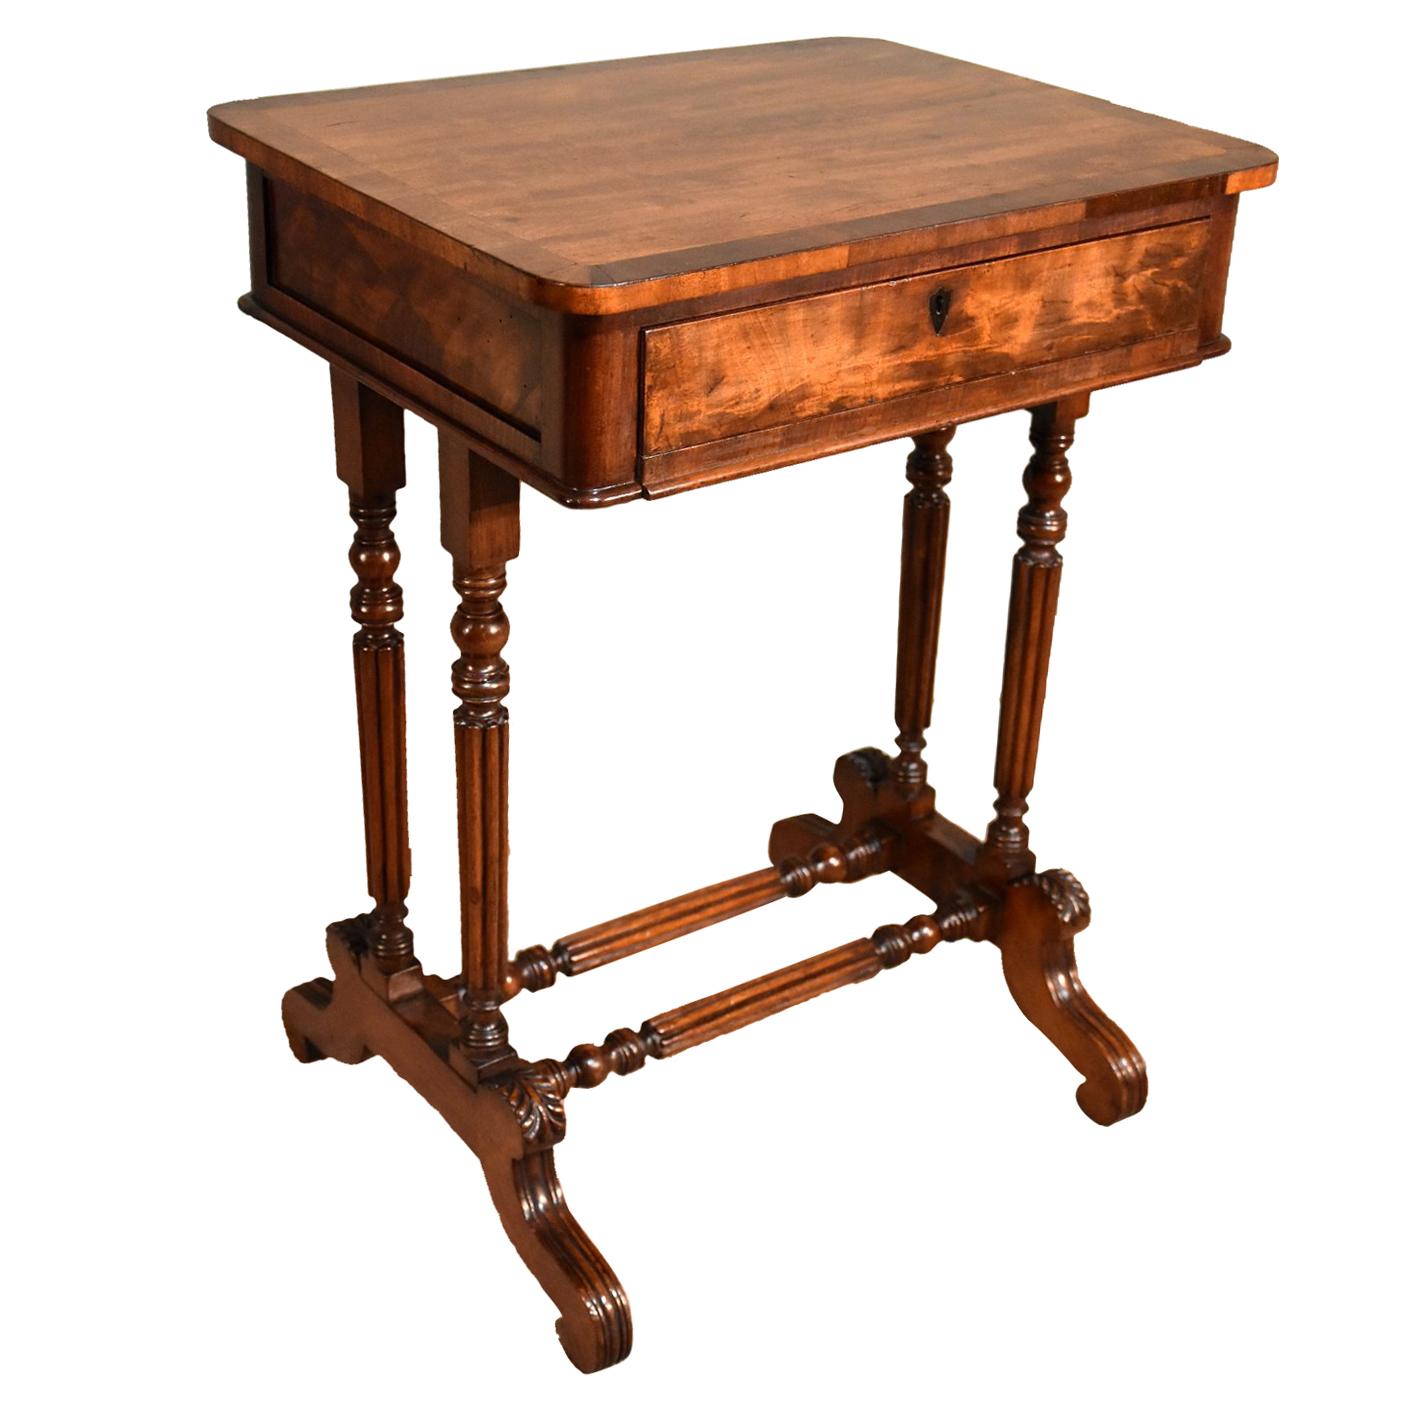 Excellent Quality Regency Mahogany Work Table